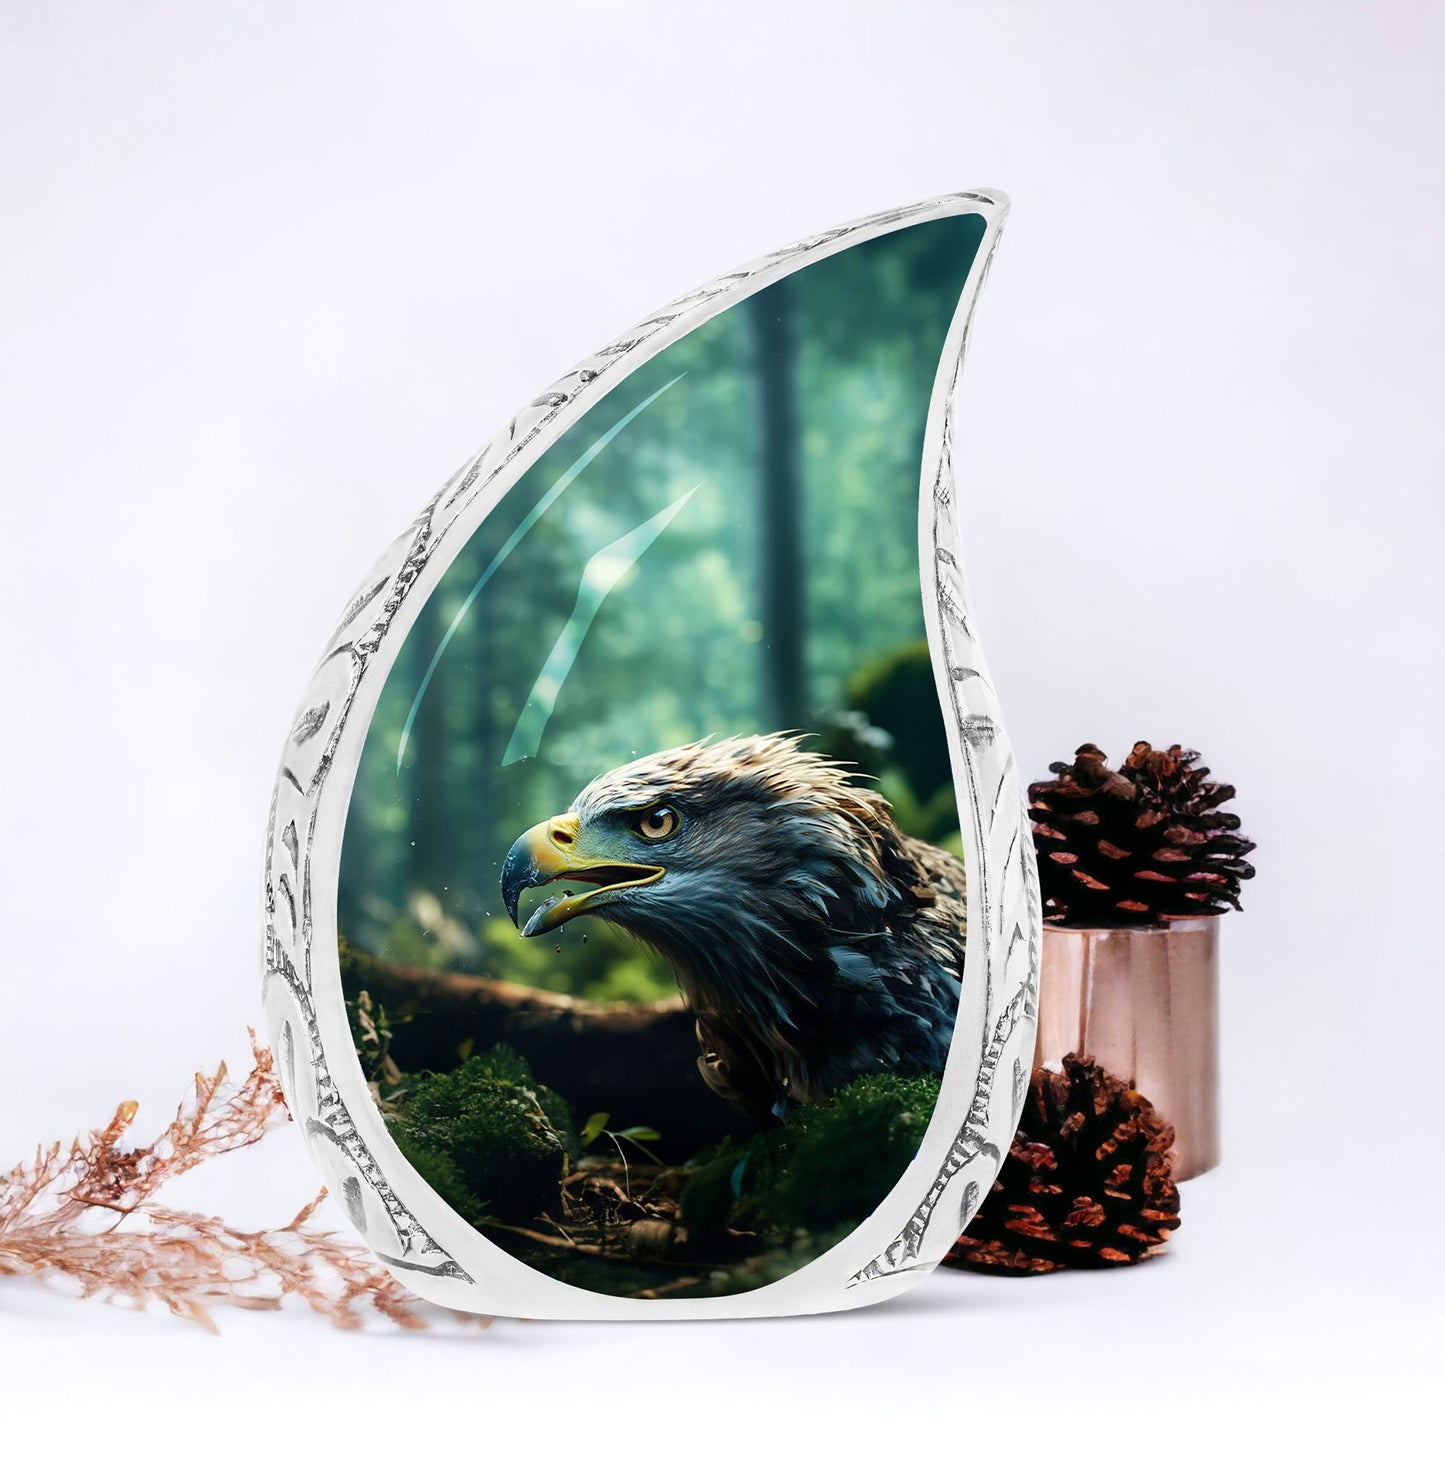 Large urn with eagle face design amidst forest setting, ideal for adult human remains, a decorative funeral choice.